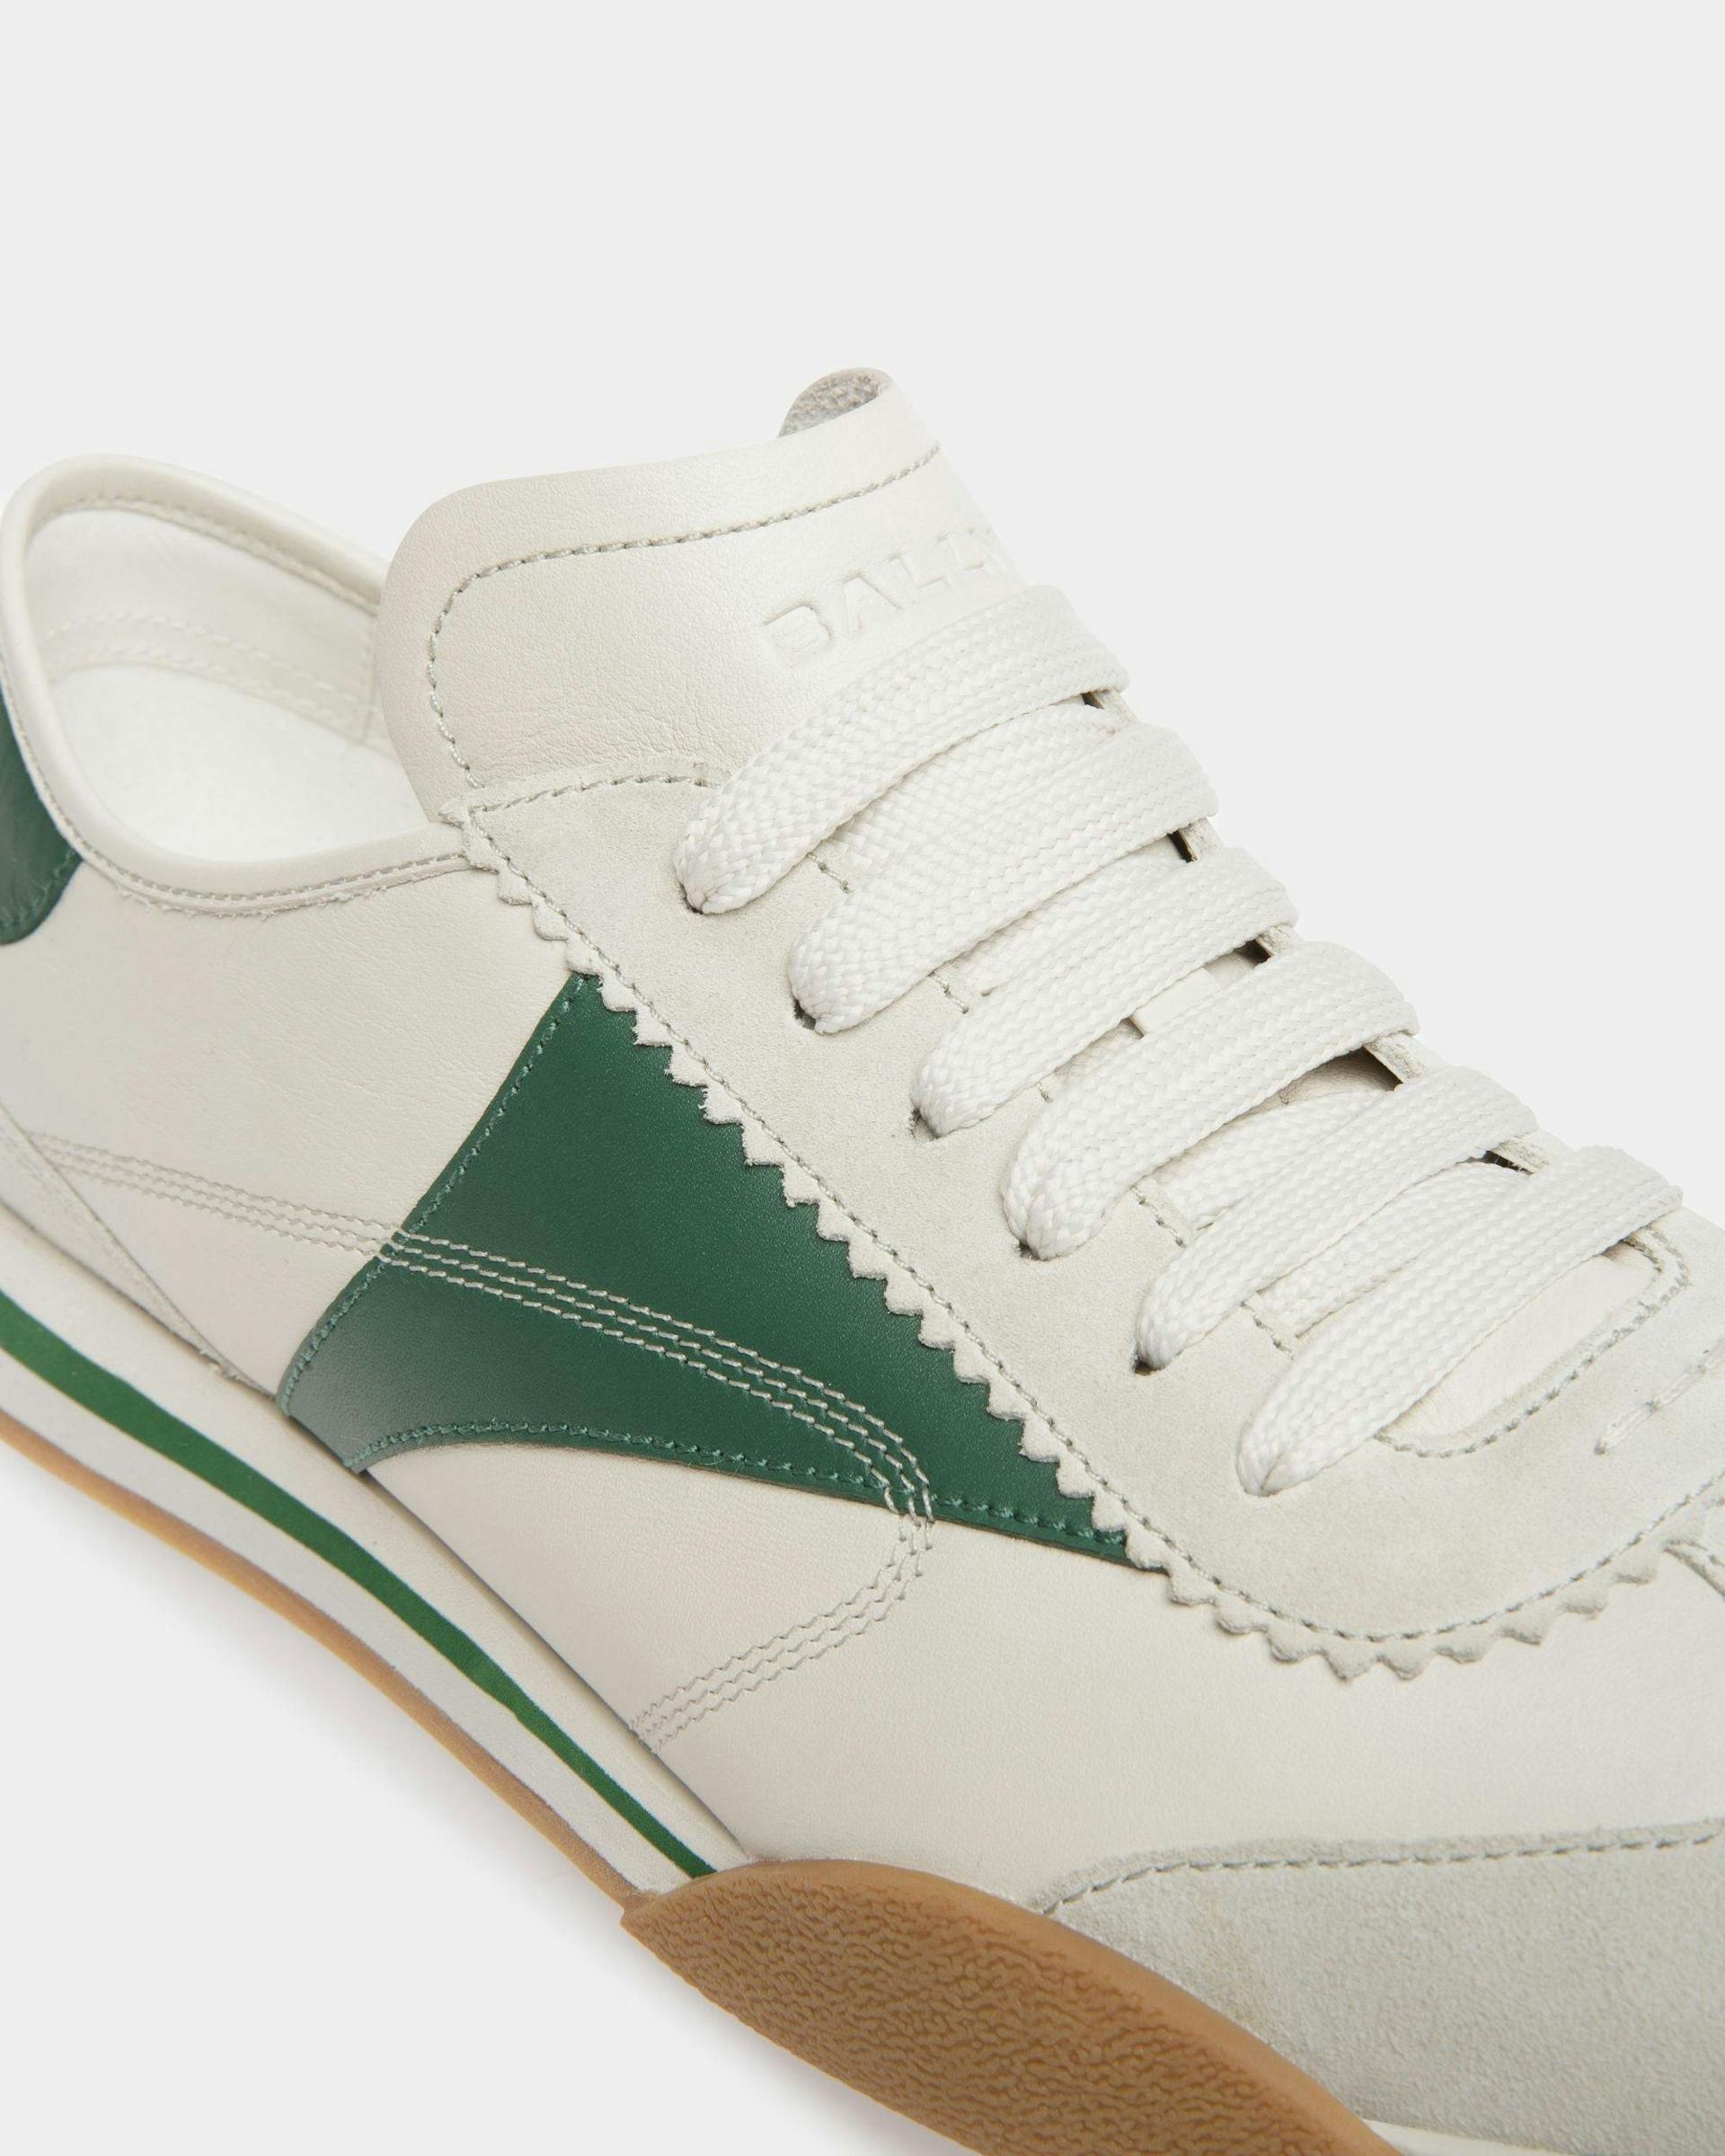 Men's Sussex Sneakers In Dusty White And Kelly Green Leather | Bally | Still Life Detail